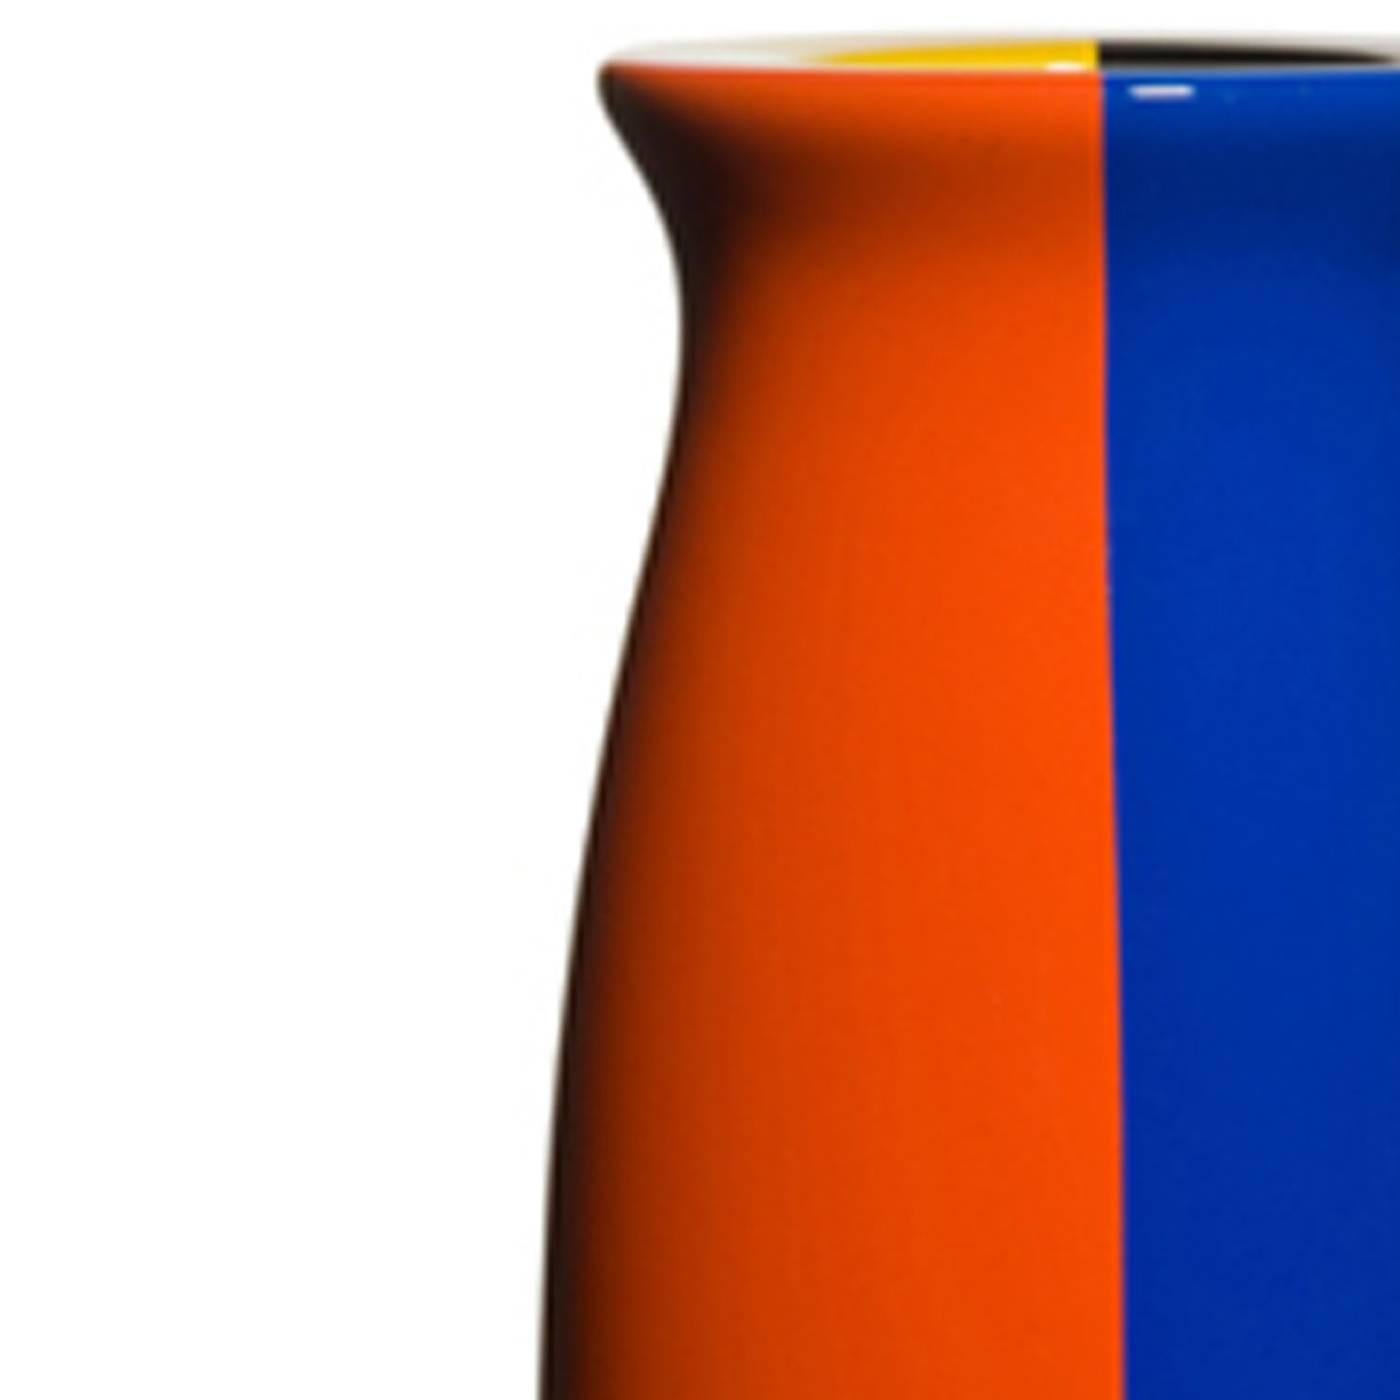 This vase with its modern appeal and striking color combination will make a statement in any decor. Part of a limited series of 50 pieces designed by Alessandro Mendini, it is made in fiberglass and decorated using artisanal methods. Each piece is